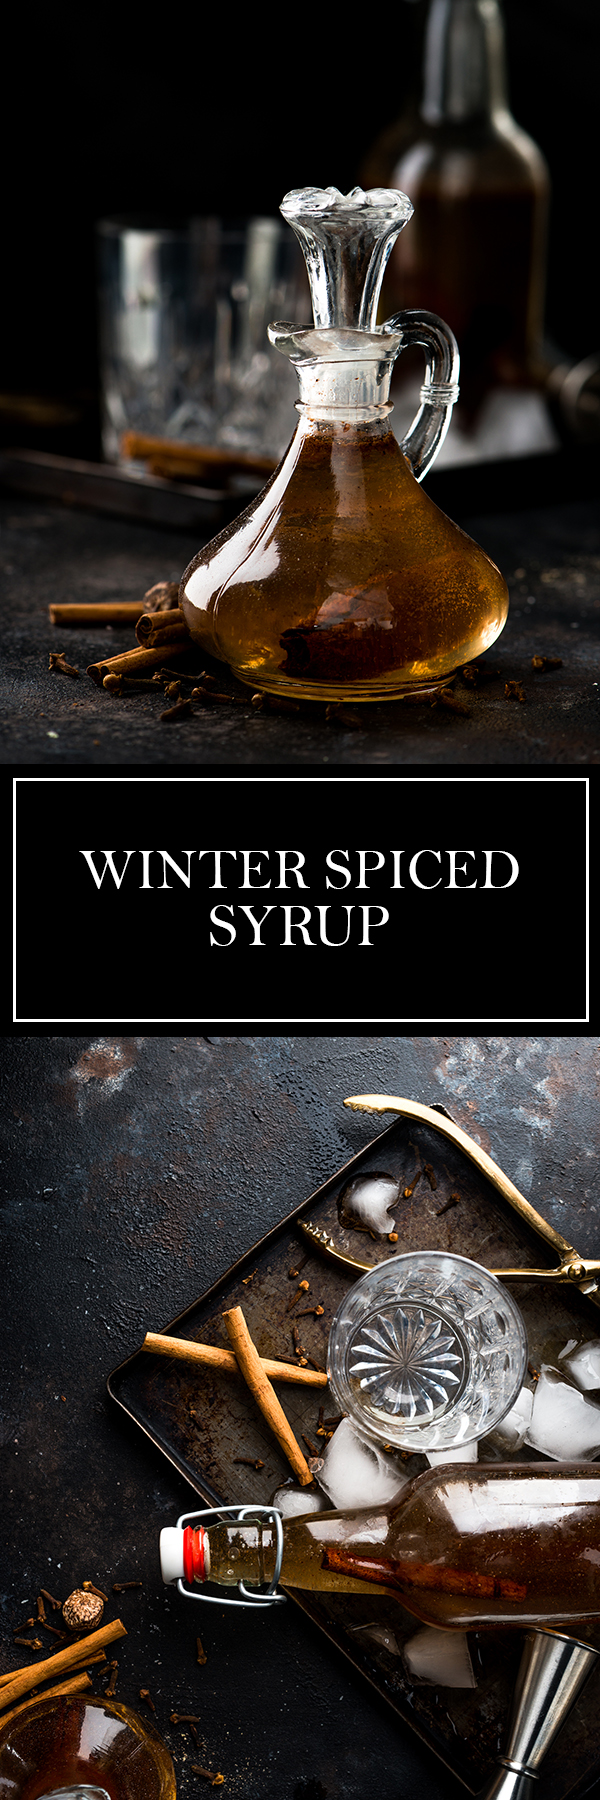 Winter Spiced Syrup